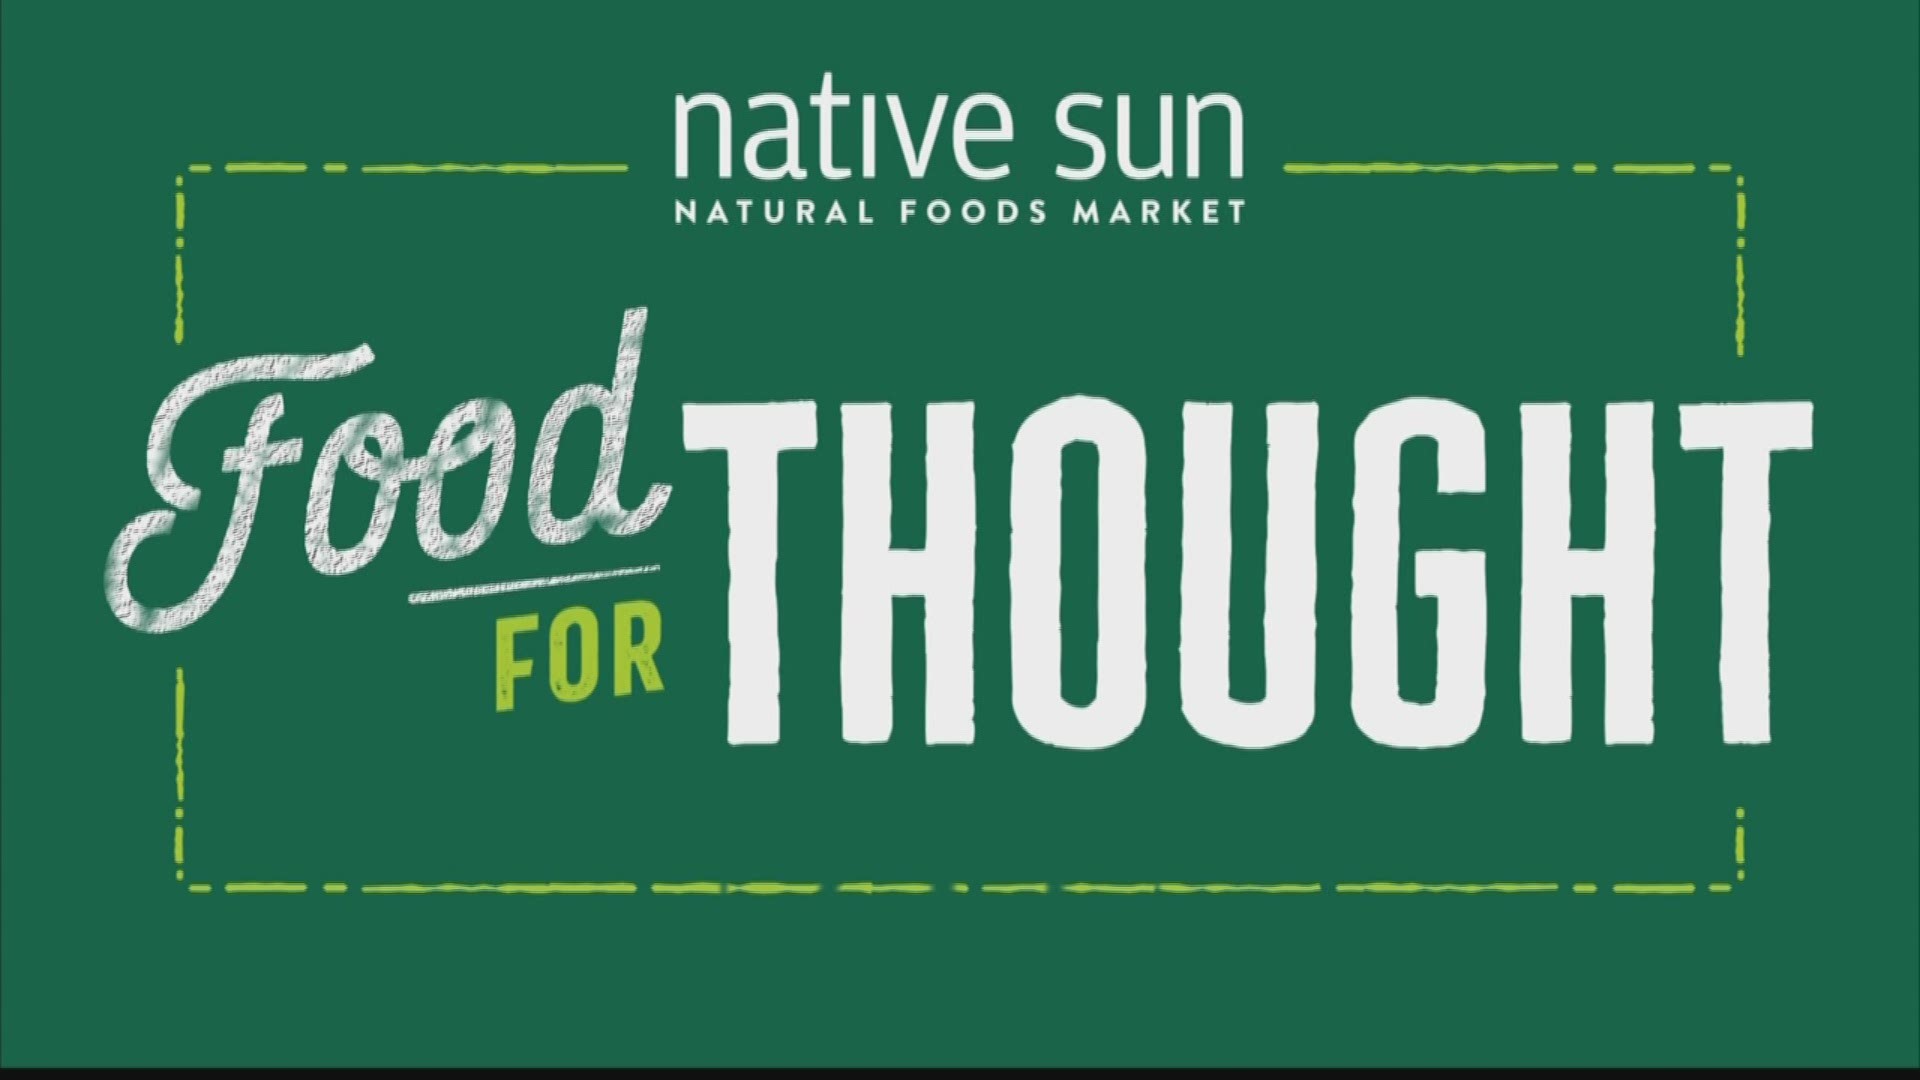 This Food For Thought segment in the Native Sun Kitchen is about functional beverages.